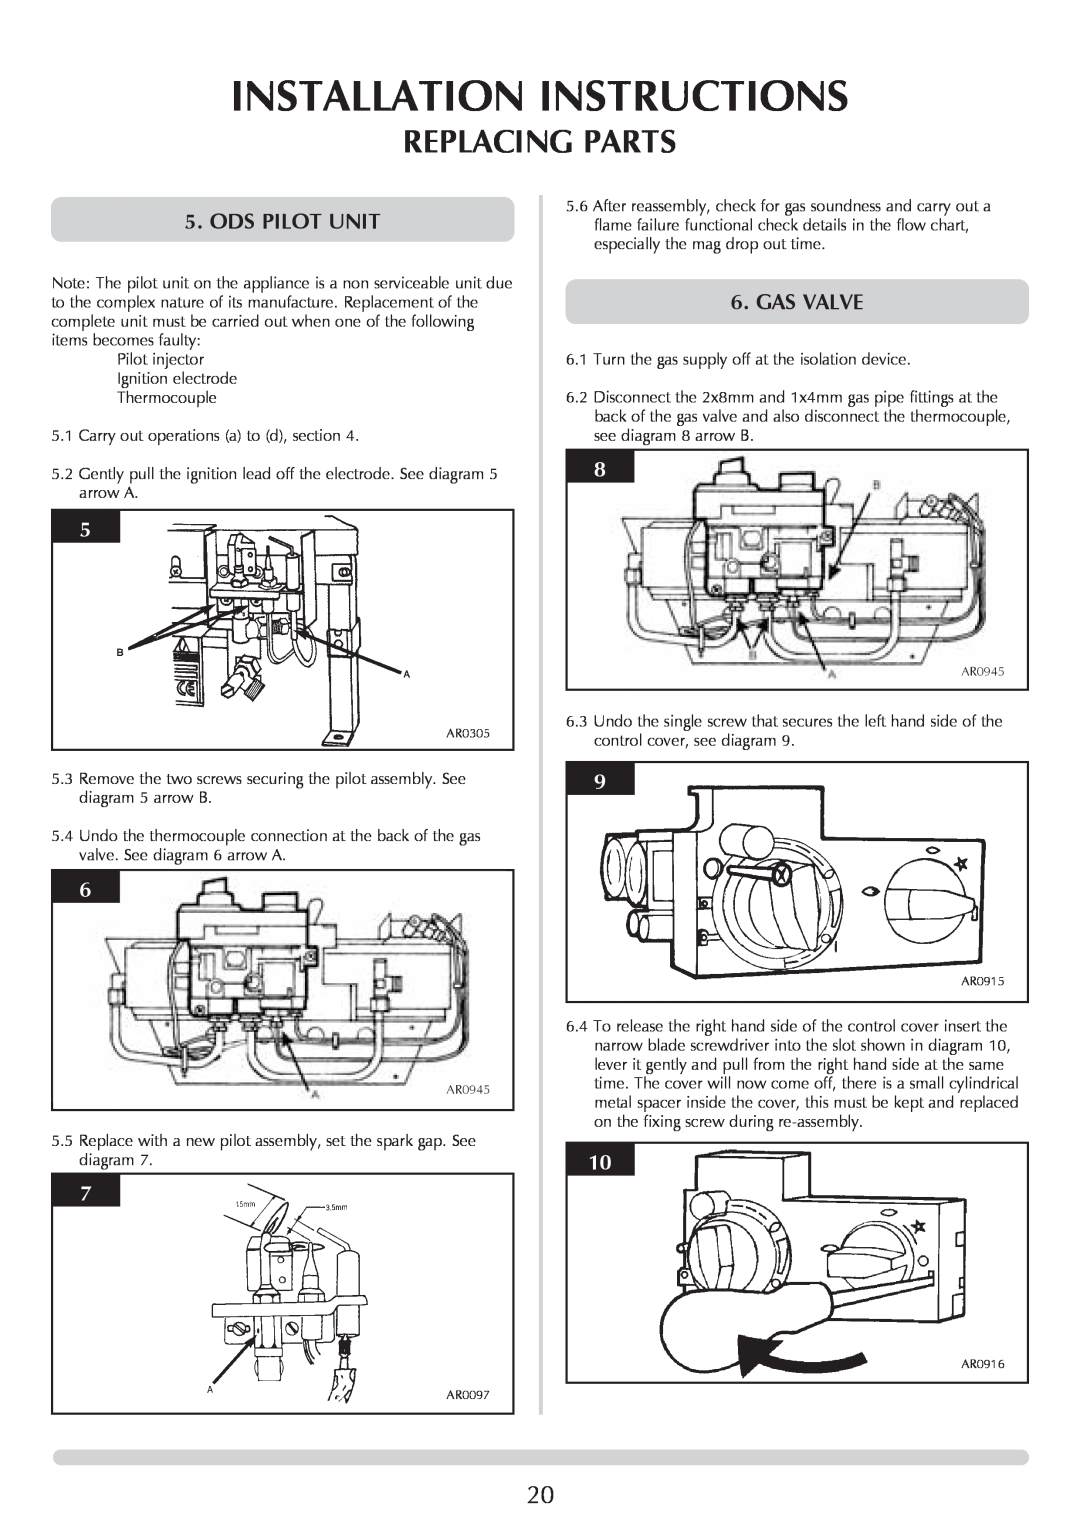 Stovax VFC Radiant & Convector Fire Range manual Installation Instructions, Replacing Parts, Ods Pilot Unit, Gas Valve 